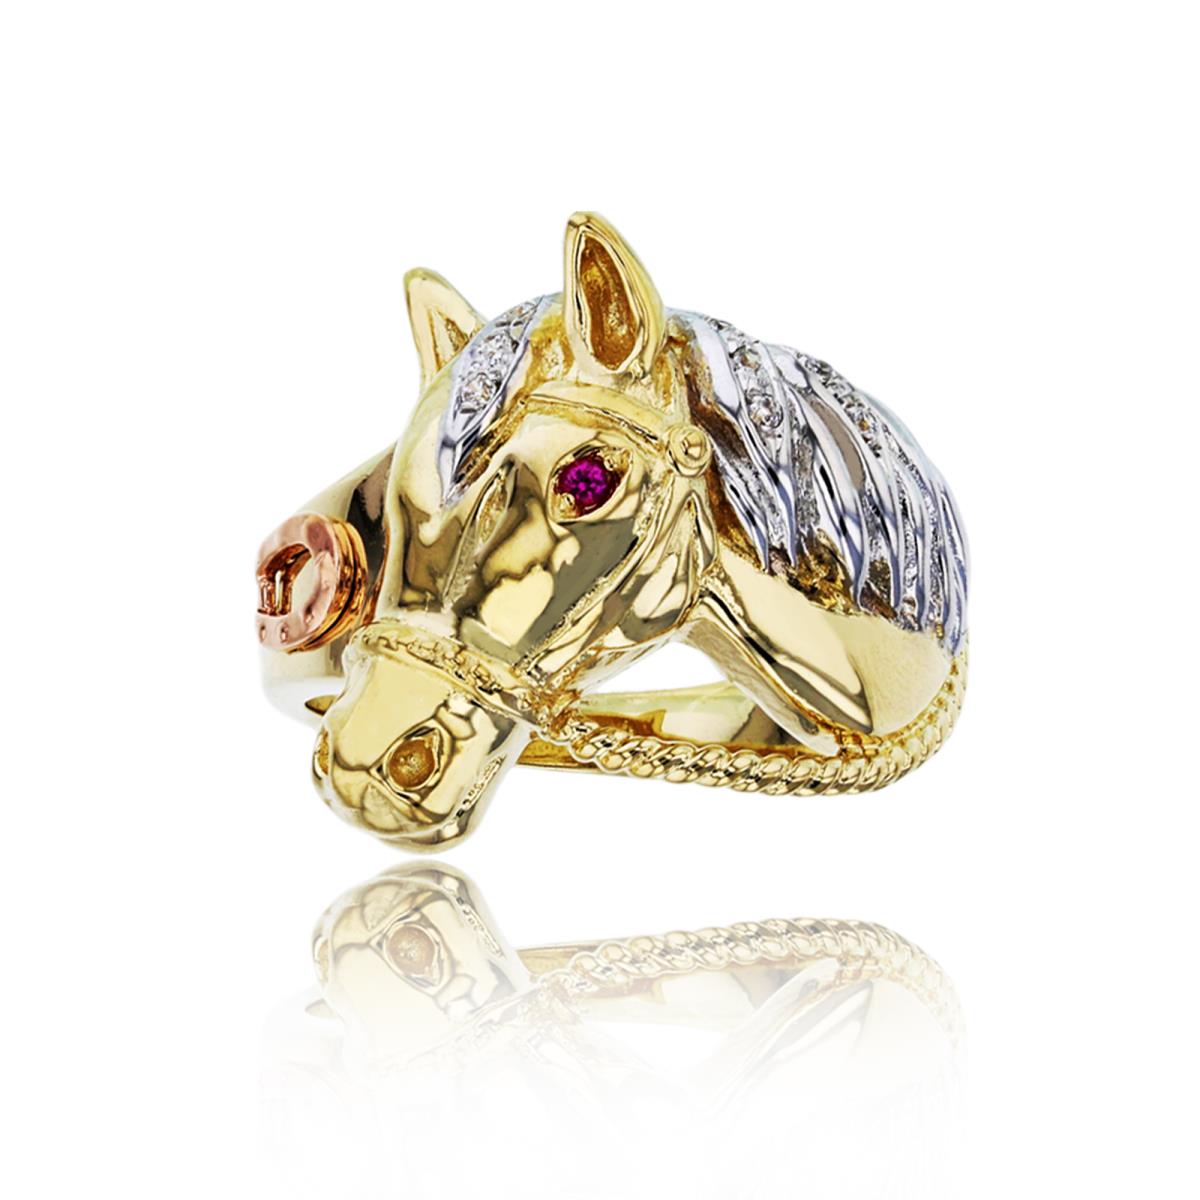 10K Tricolor Gold Textured Horse Fashion Ring